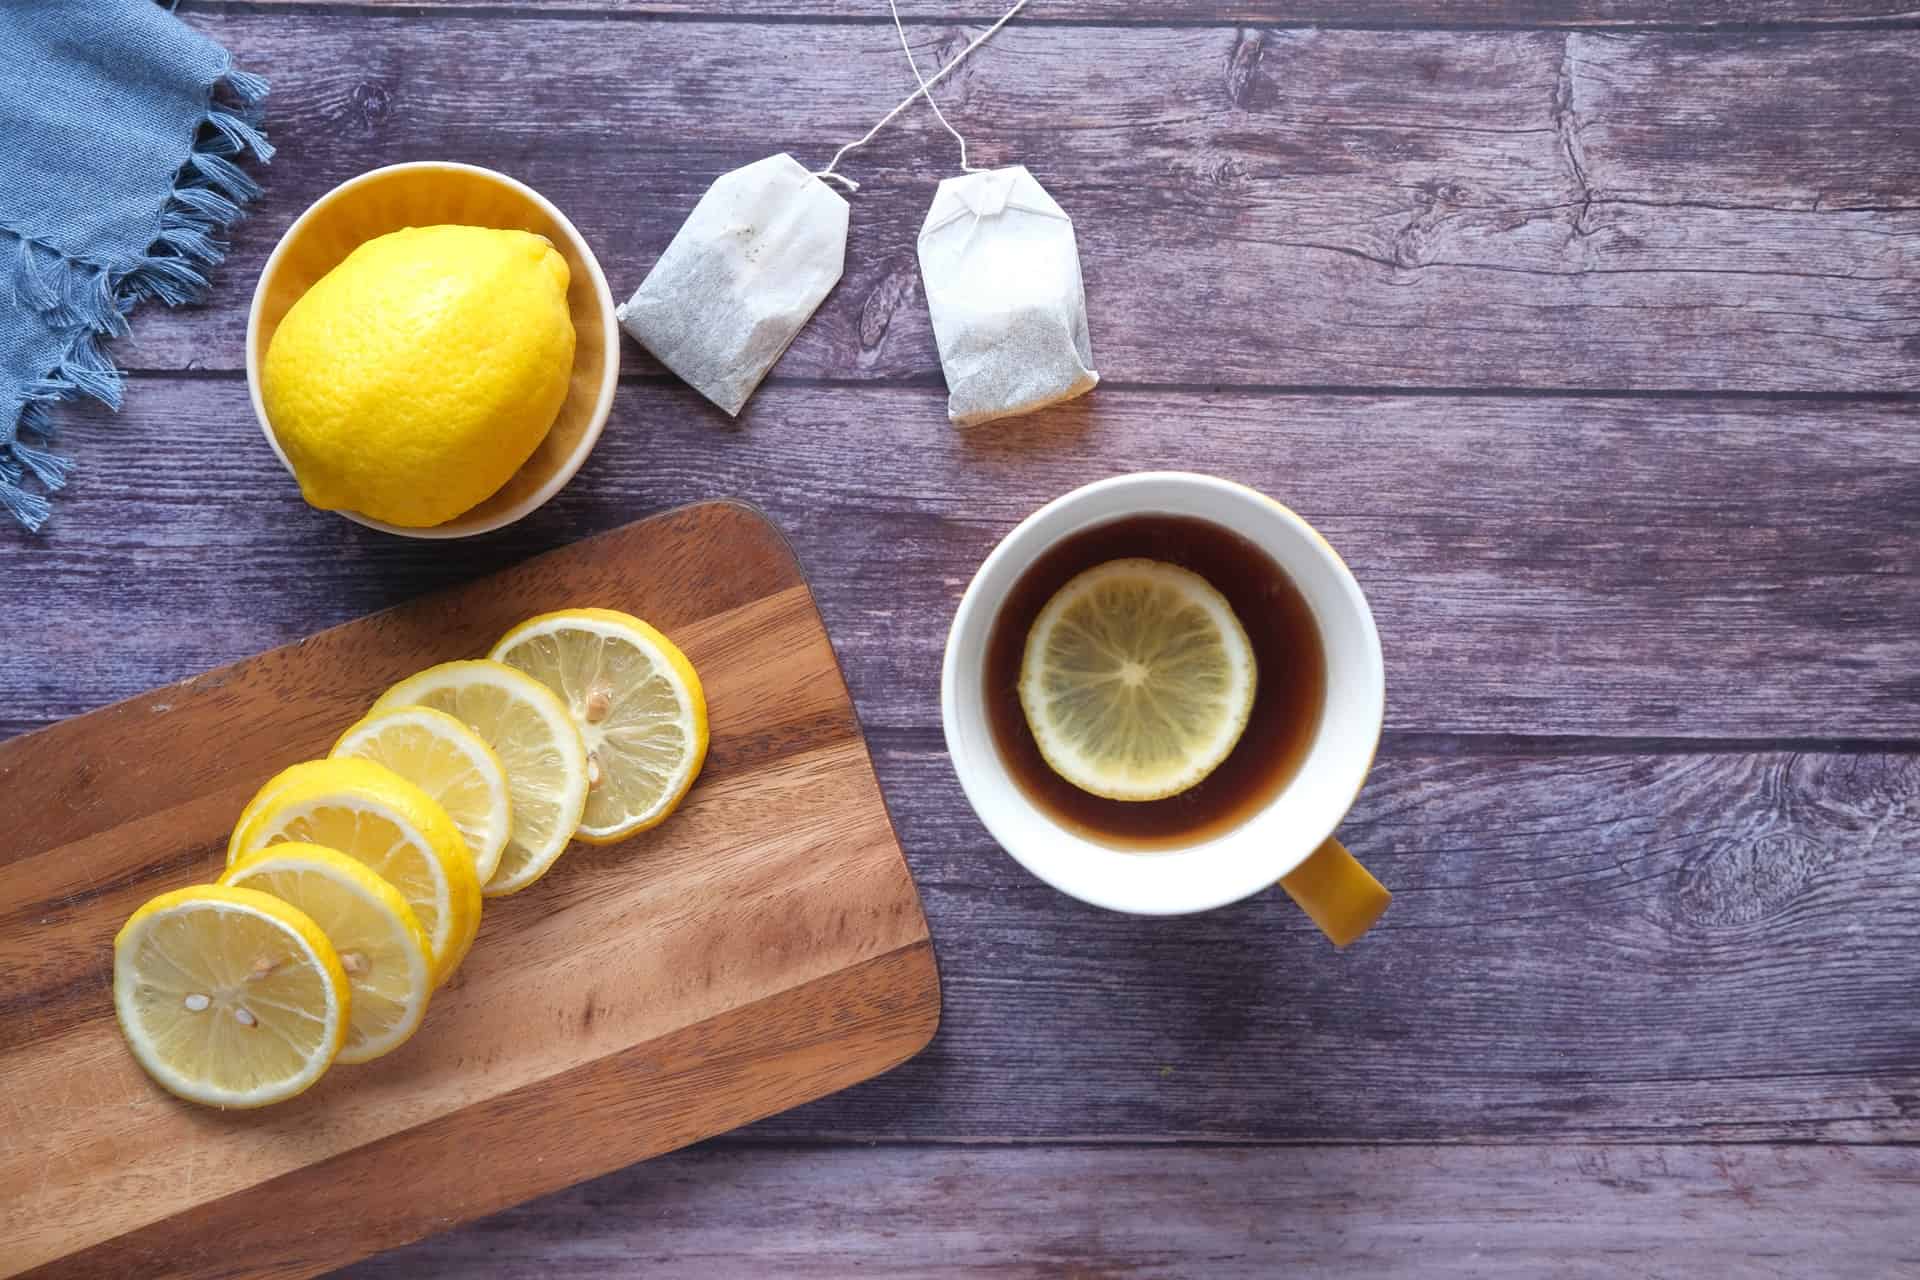 Home remedies for colds